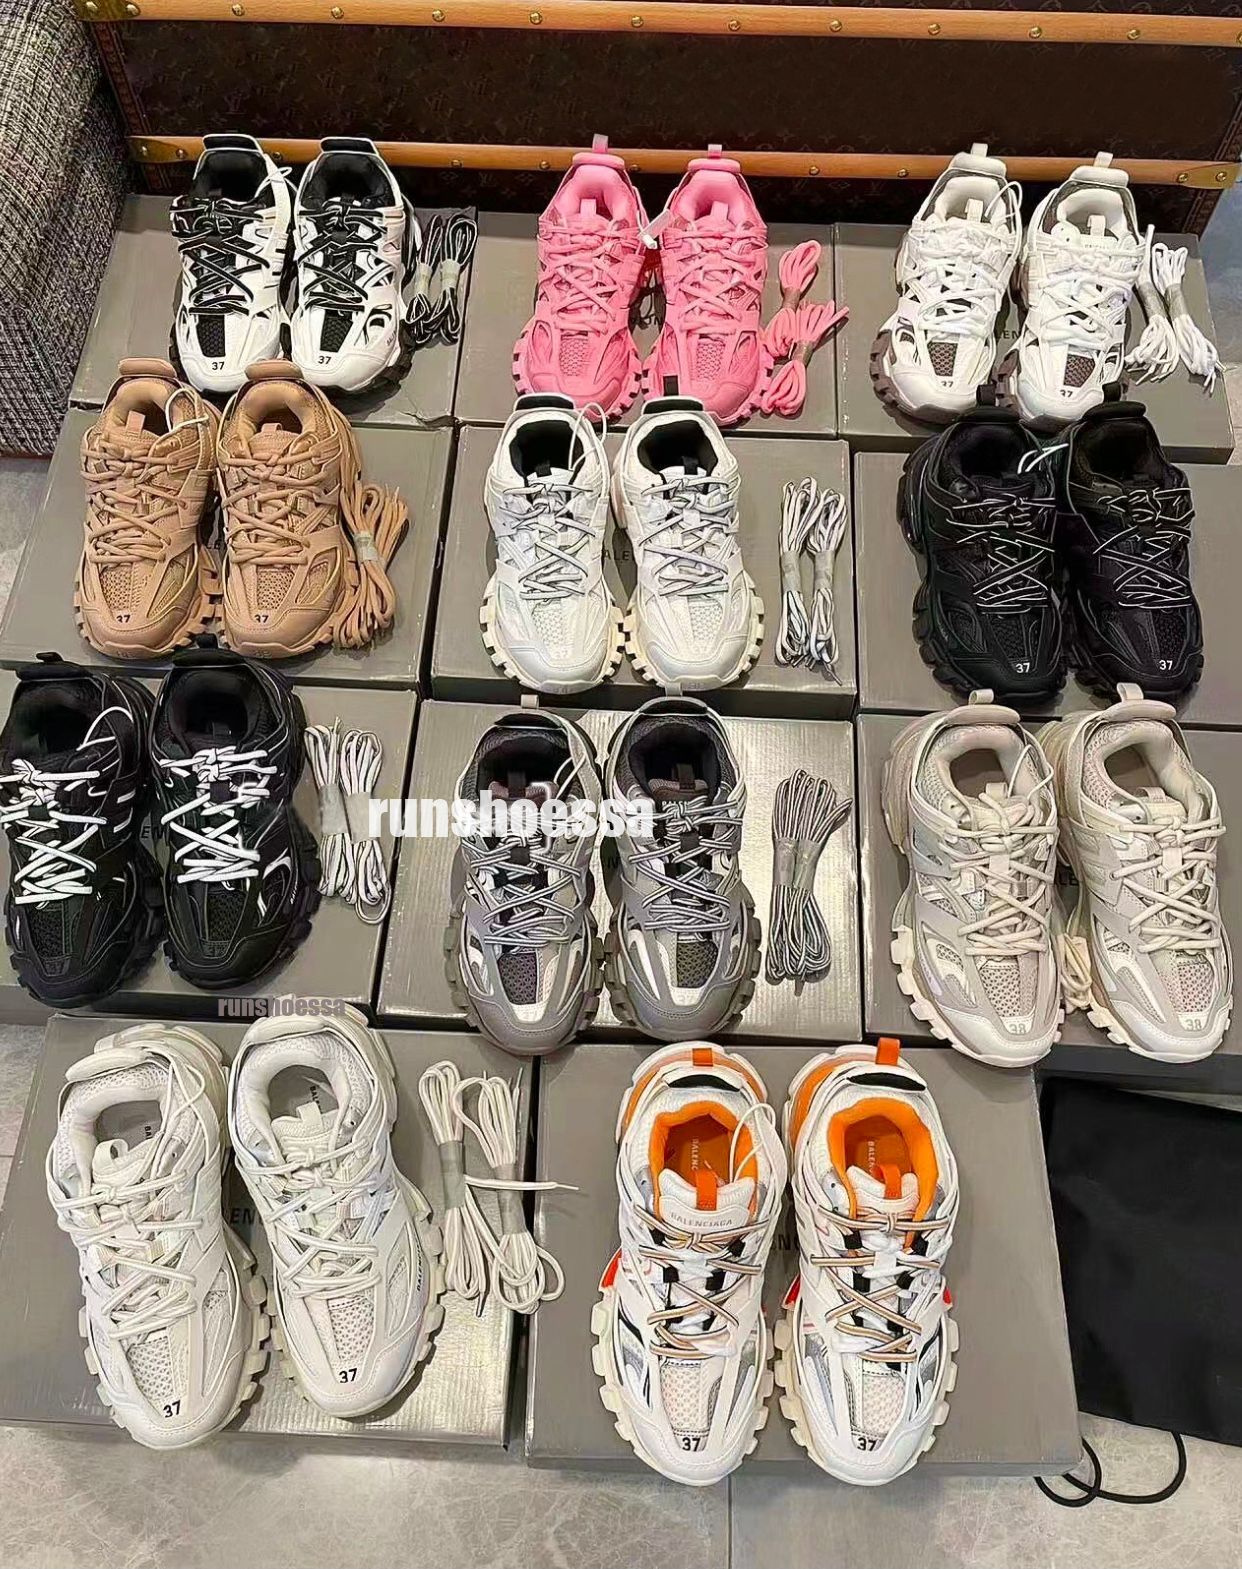 Look at these Nice Balenciaga DHGate Replica Sneakers. Get them